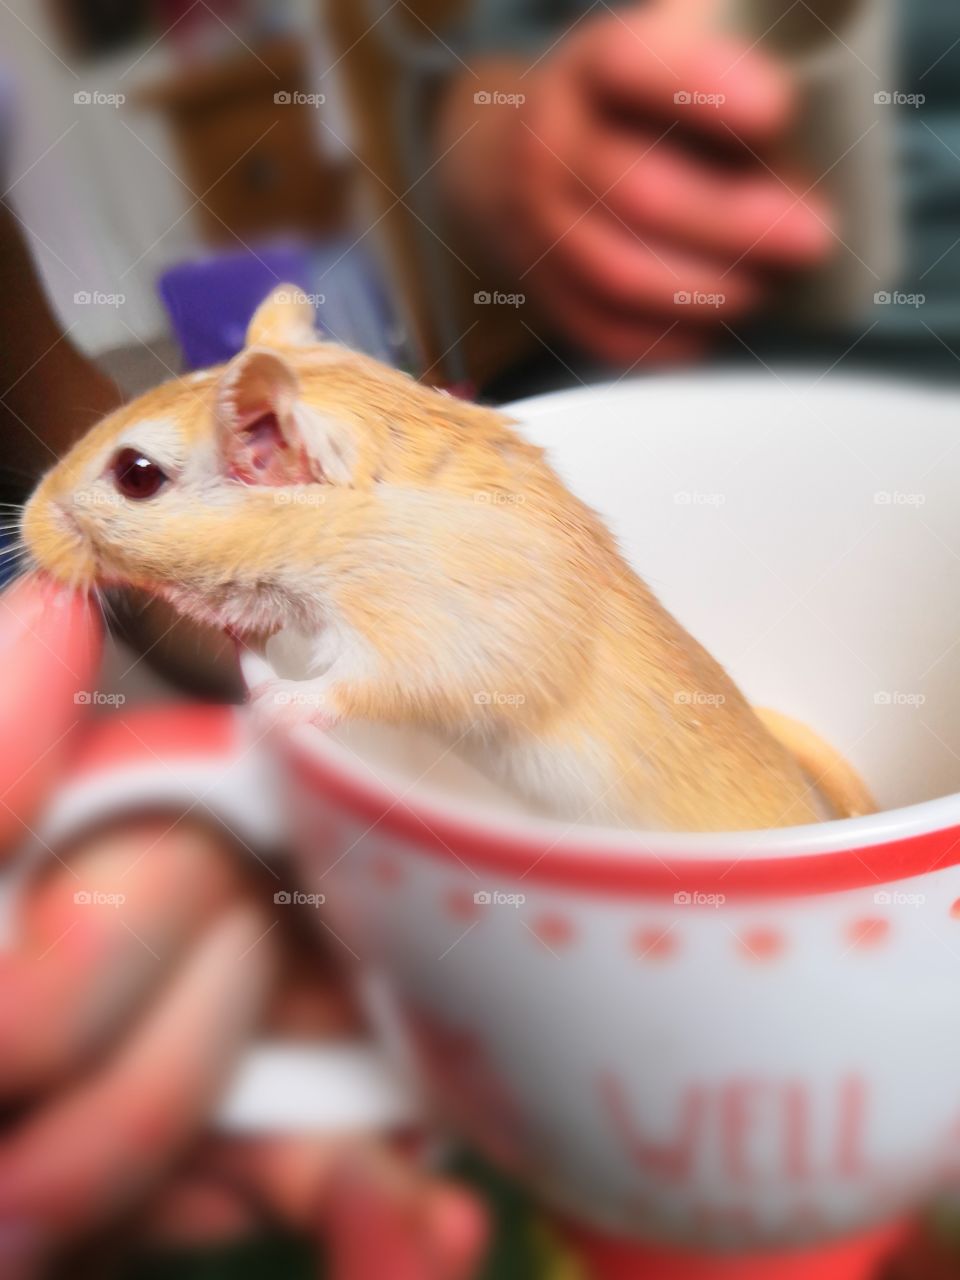 Gerbil in a mug sniffing at the hand holding it